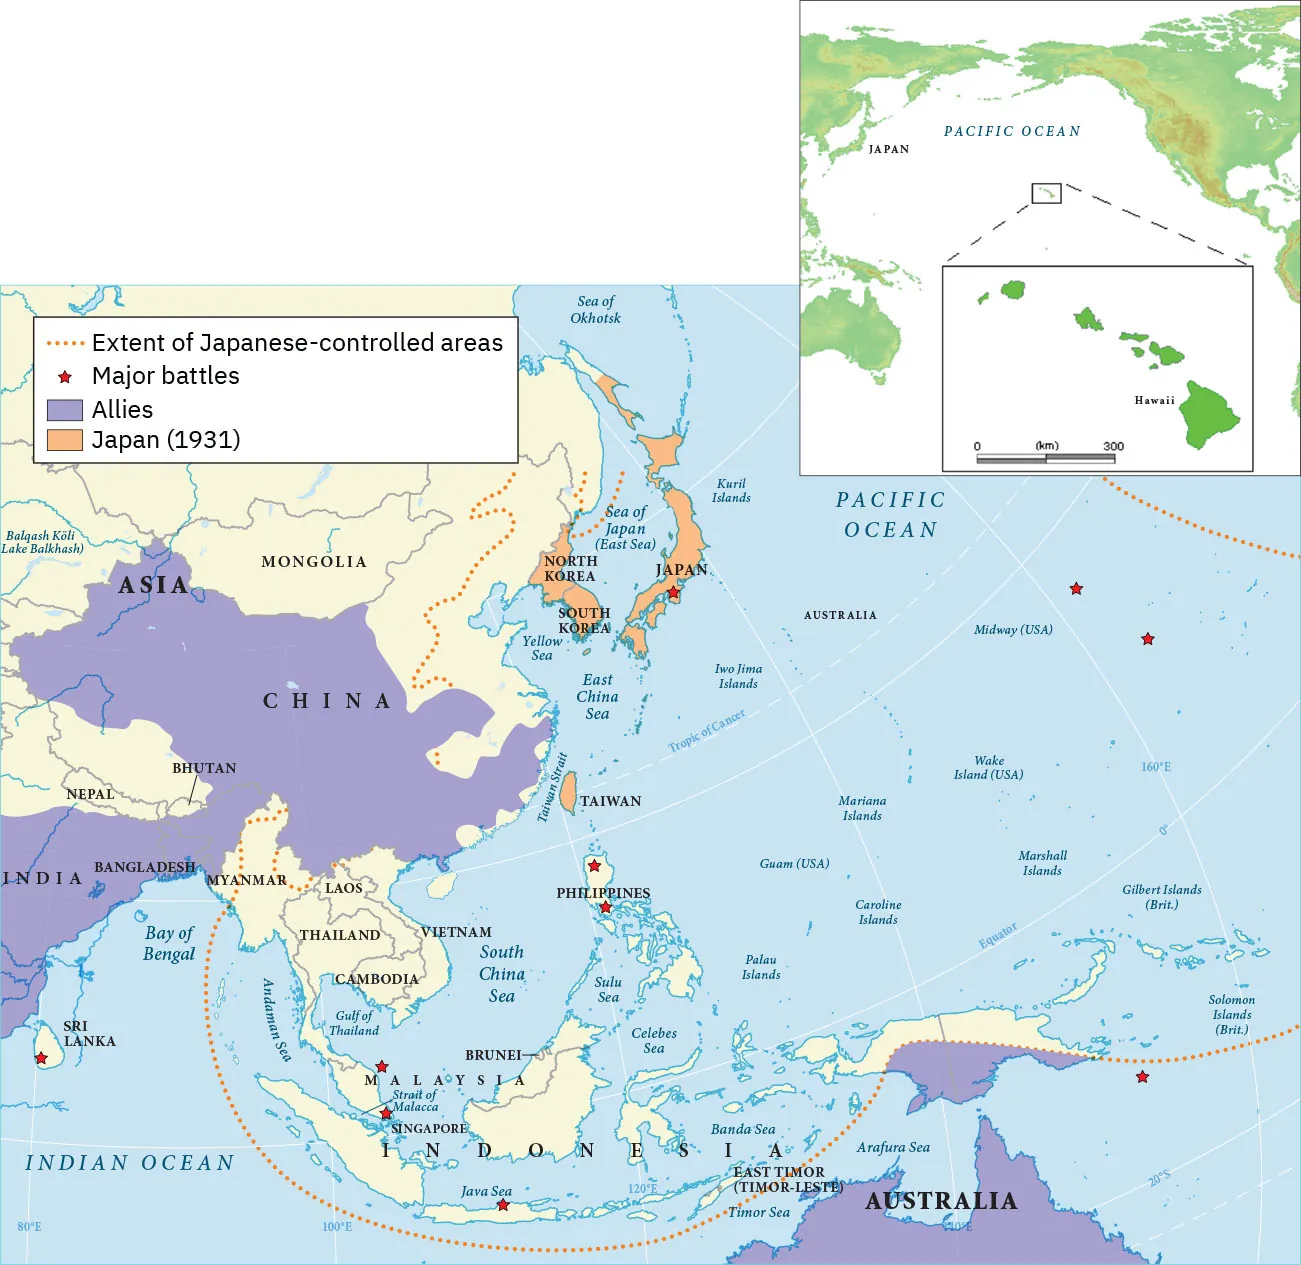 The figure includes two maps. In the upper right-hand corner, a small partial world map centered on the Pacific Ocean, with Asia on the left and North America on the right is shown. There is a box around the Hawaiian Islands that are in the middle of the Pacific Ocean. There is a close-up view of the Hawaiian Islands. The main map shows Southeast Asia and the northern part of Australia. Australia, the southern half of Papua New Guinea, the majority of China, most of India, Bangladesh, and some of Myanmar and Bhutan are shaded purple indicating Allies. The Korean peninsula, Japan, Taiwan, and the southern half of an island north of Japan are shaded orange. There are stars indicating major battles in Japan, Sri Lanka, two in the Philippines, two in Malaysia, one on the coast of the Java Sea, two in the Pacific Ocean, and one new Papua New Guinea. A dashed orange line indicates the extent of Japanese-controlled areas and runs from the top right of the Pacific Ocean, down cutting the island of Papua New Guinea in half horizontally, around Indonesia, through the Indian Ocean, through Myanmar, going up through the eastern part of China, running along the eastern coast of Asia and ending near the Russian border. Two more orange dashed lines come out of North Korea and extend upward for a short distance.